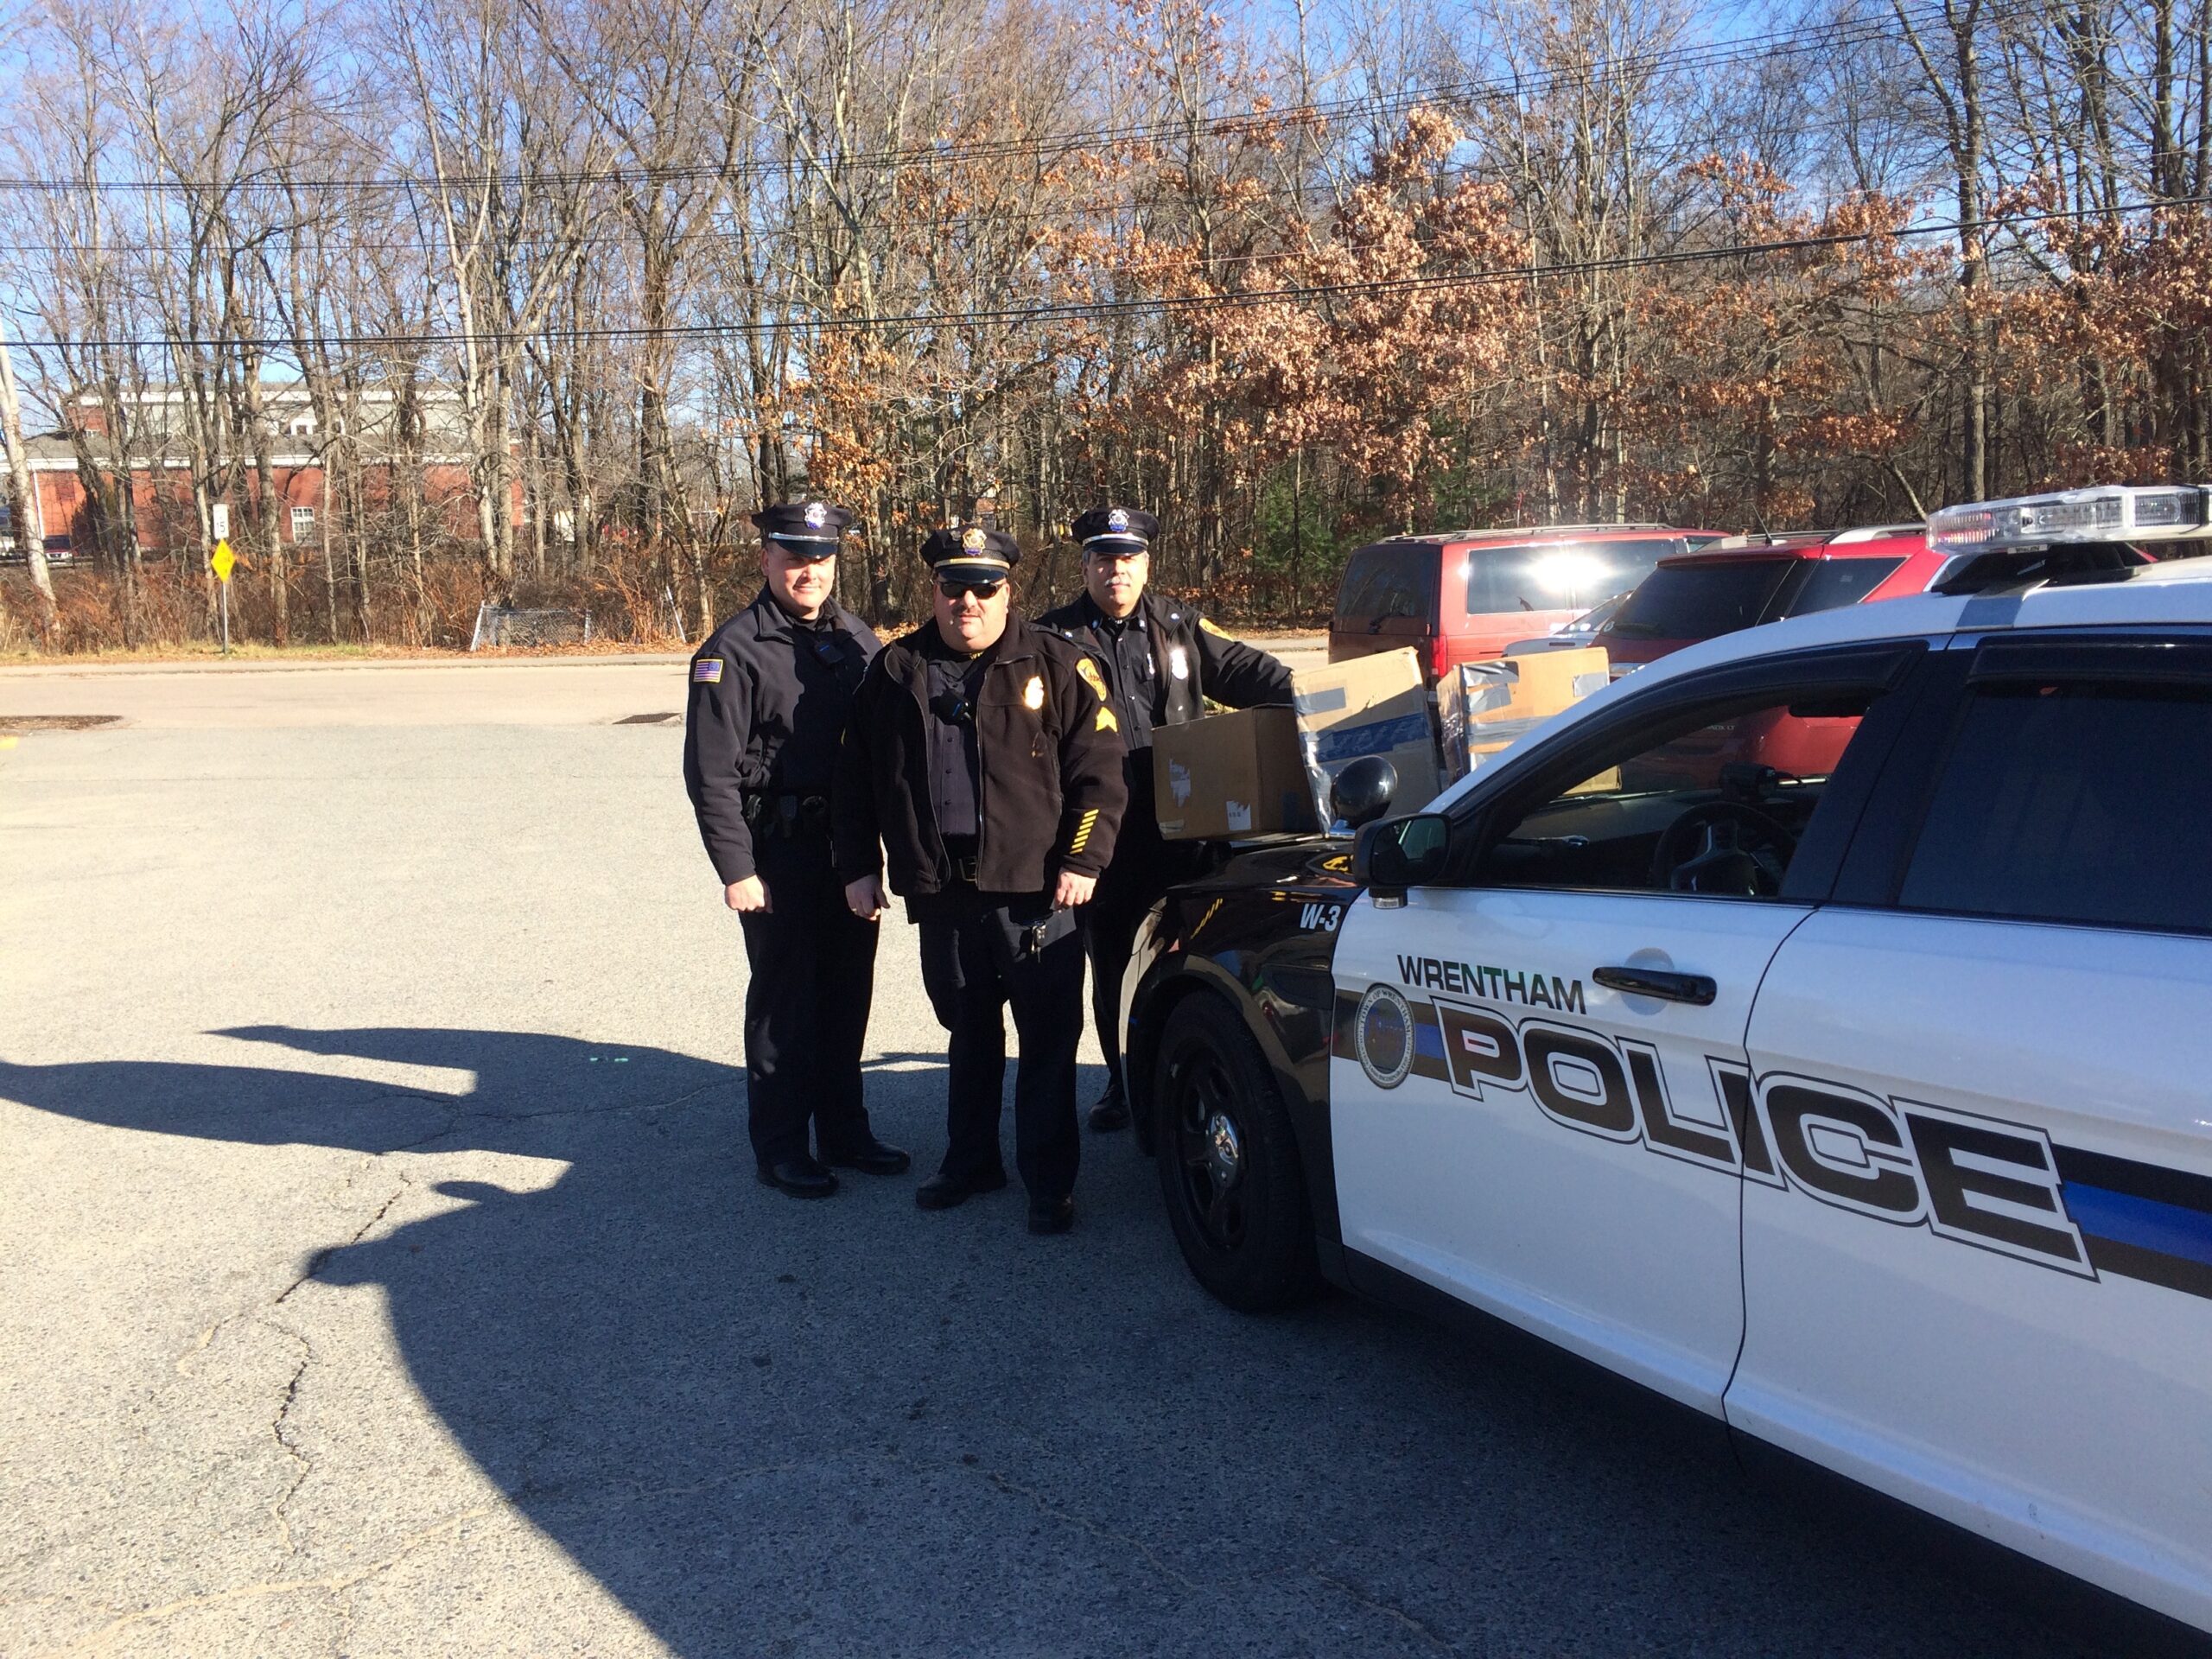 Wrentham Police Association Answers Our Call for Donations